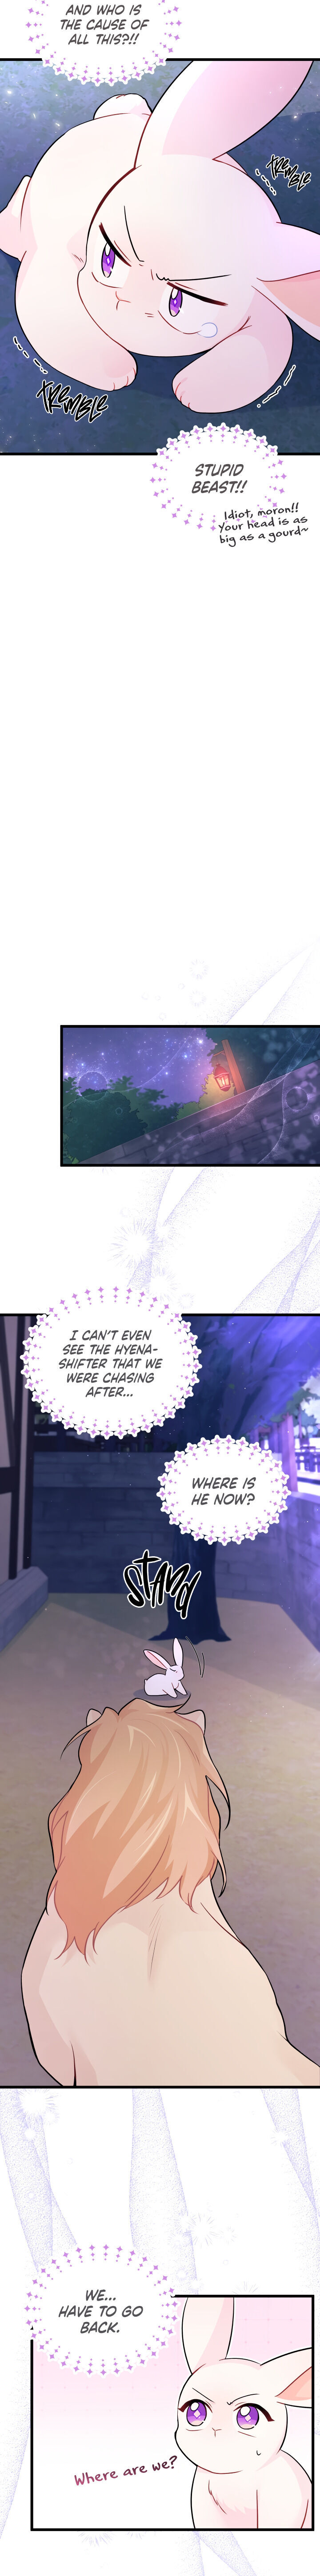 A Symbiotic Relationship Between A Rabbit And A Black Panther - Chapter 34 Page 18